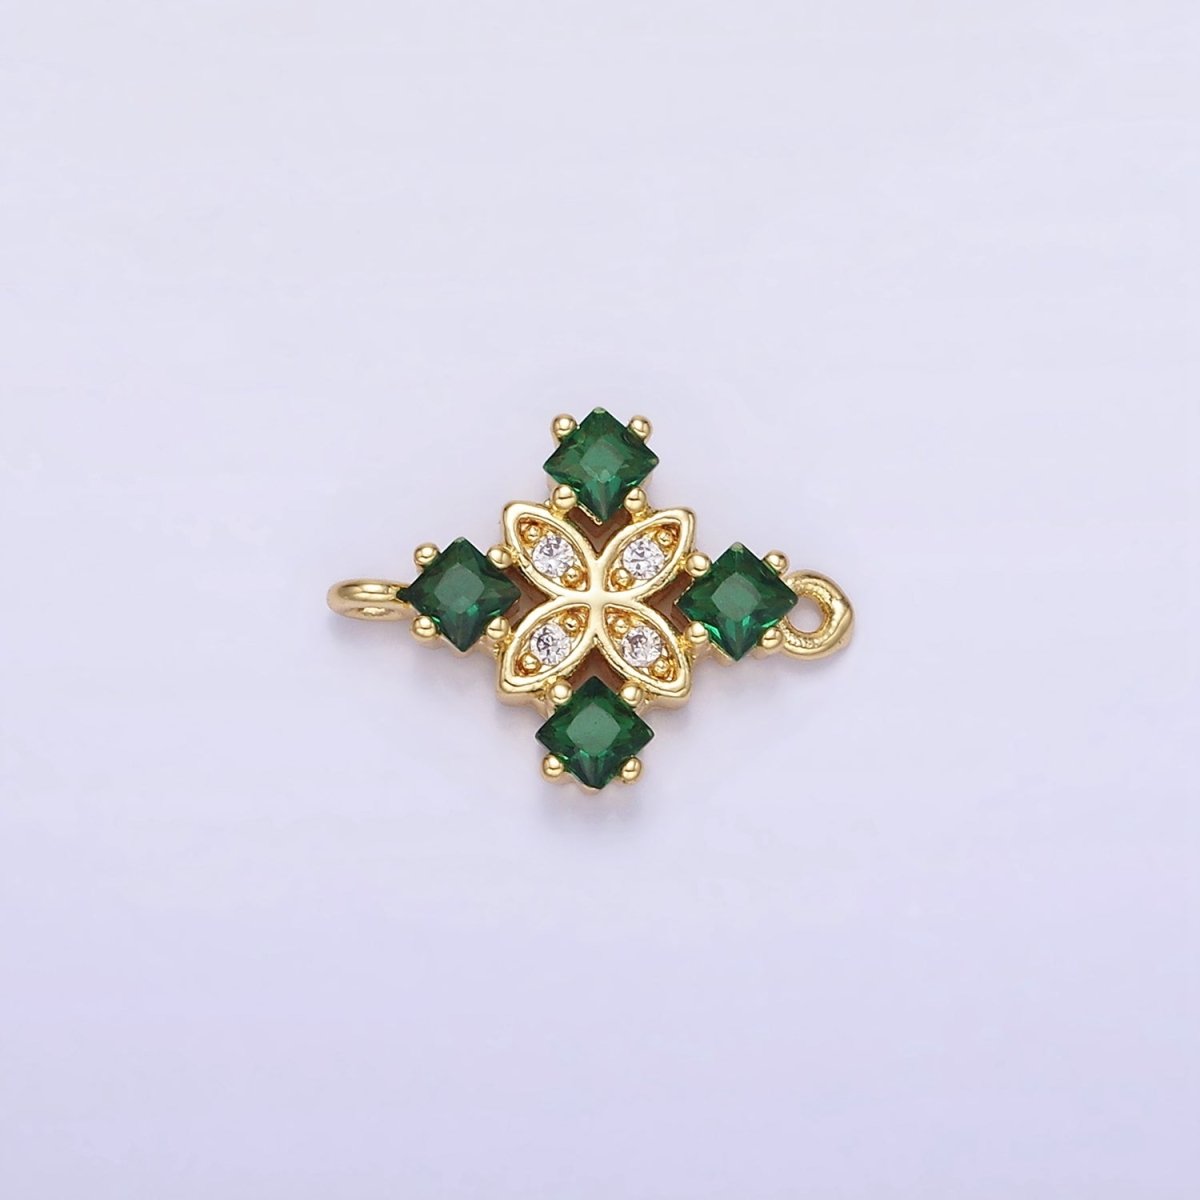 14K Gold Filled Clear, Purple, Green, Red, Pink Rhombus CZ Flower Connector | G339 - G341 - DLUXCA